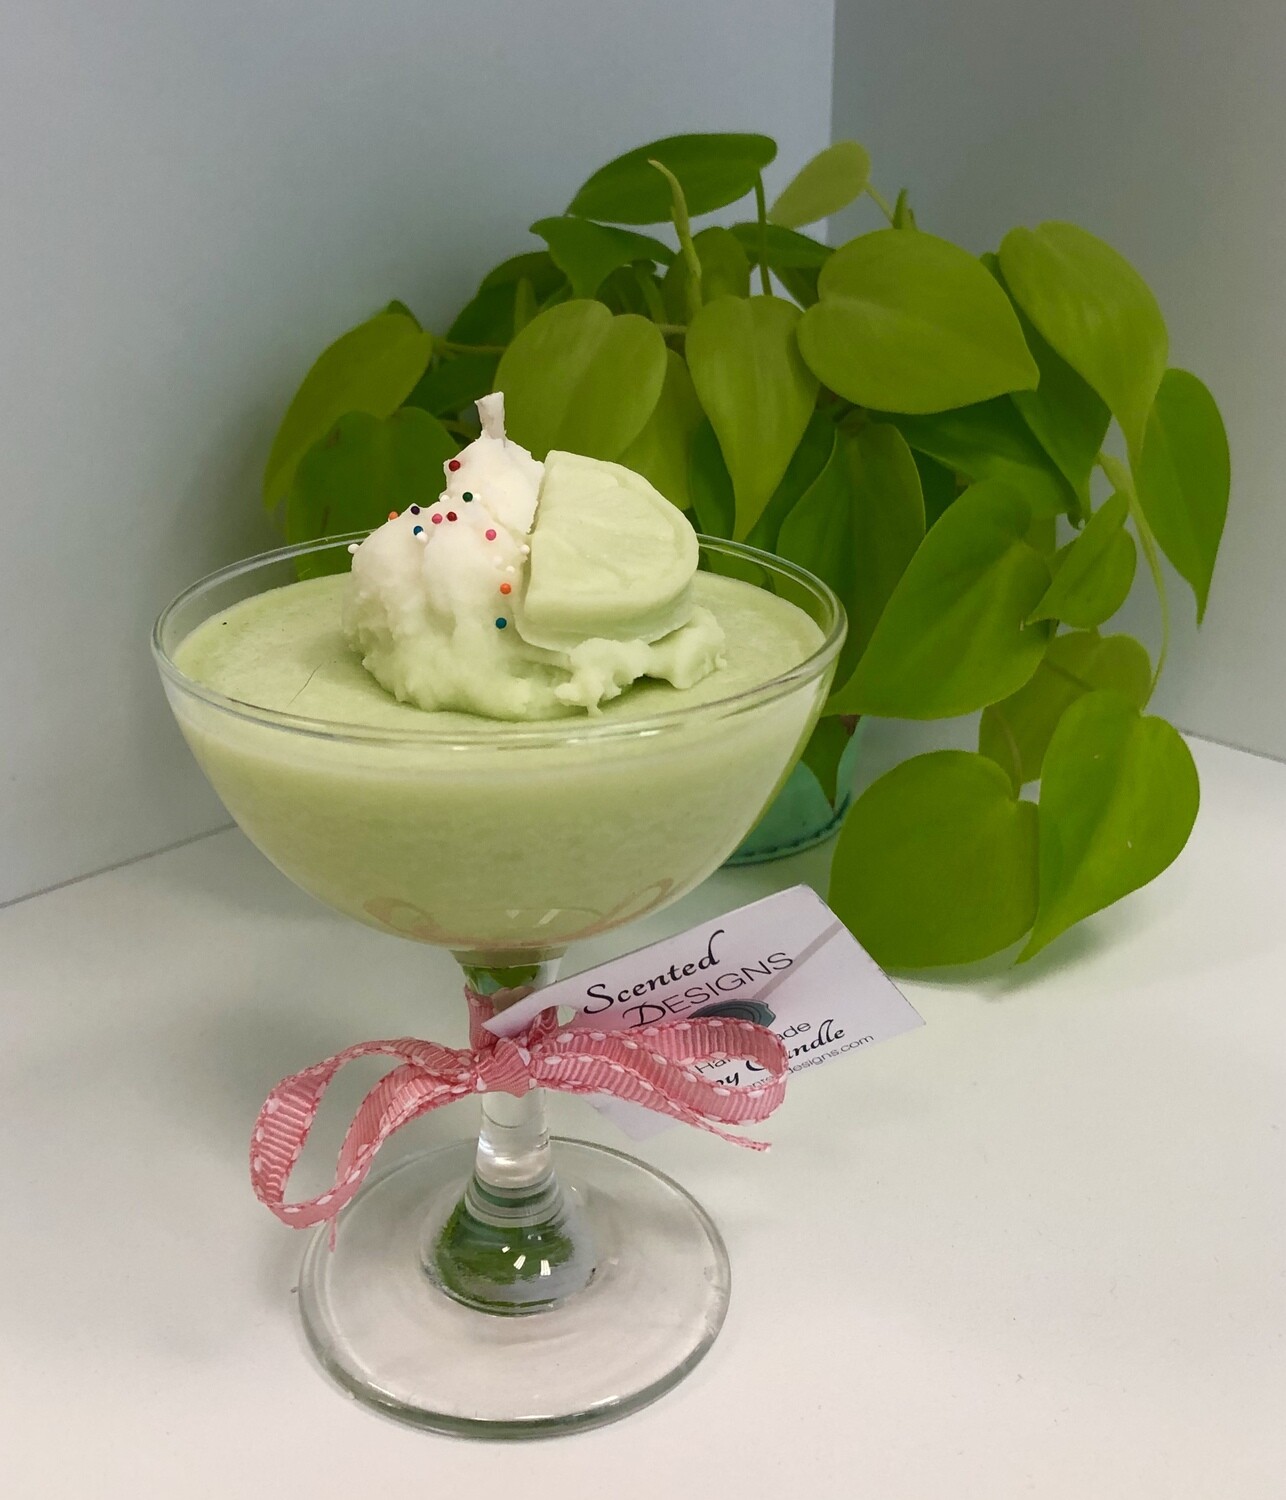 Dessert Soy Candle - Key Lime